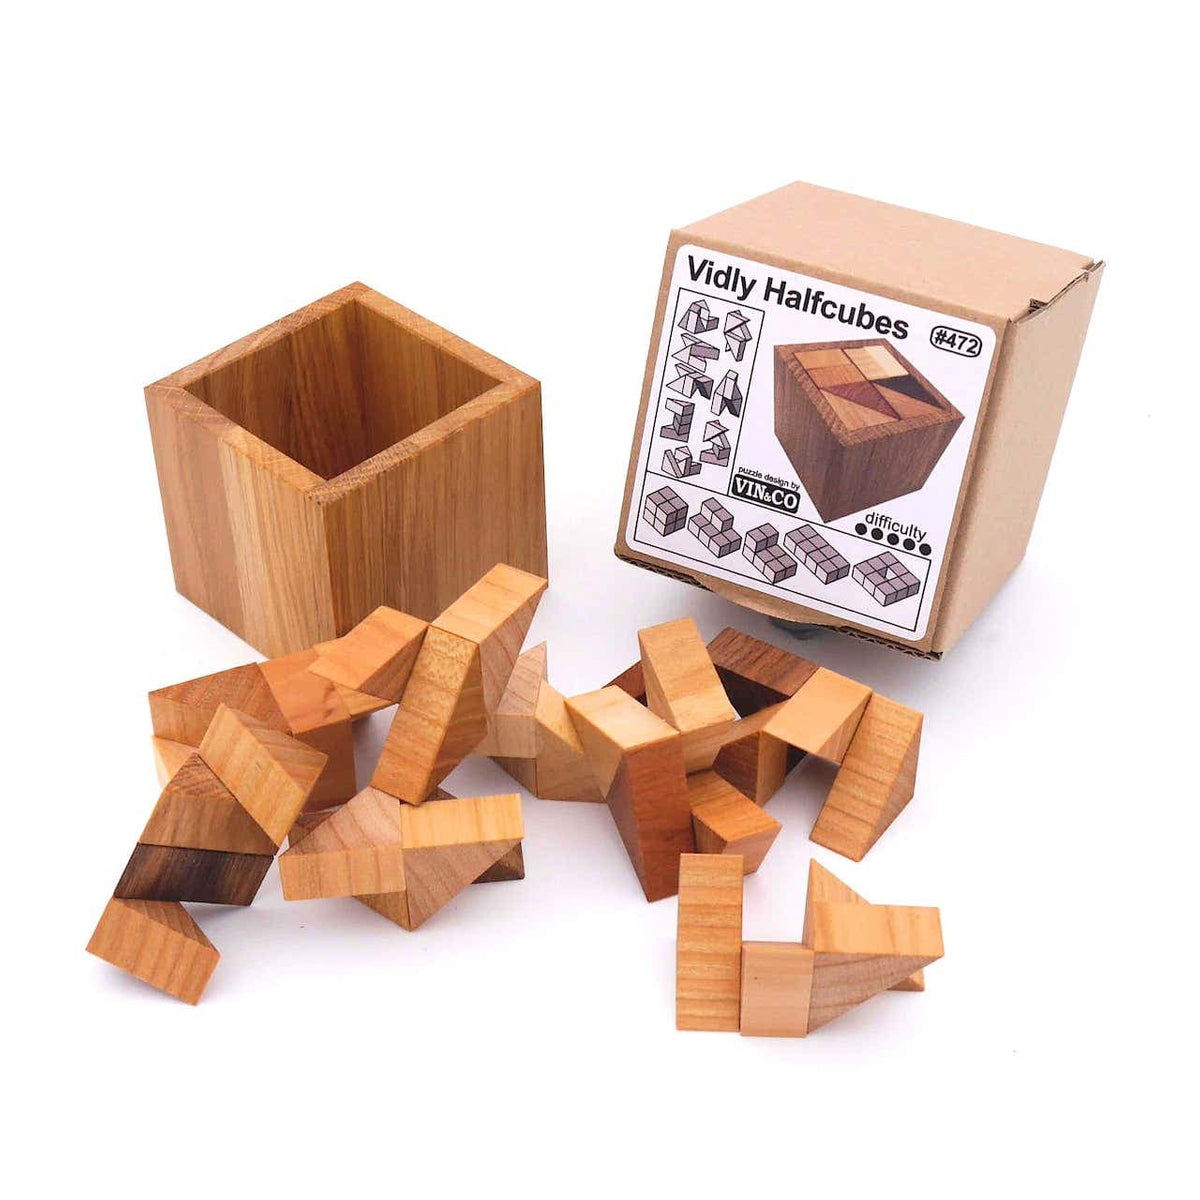 VIDLY HALFCUBES - interessantes, schwieriges Packing-Puzzle